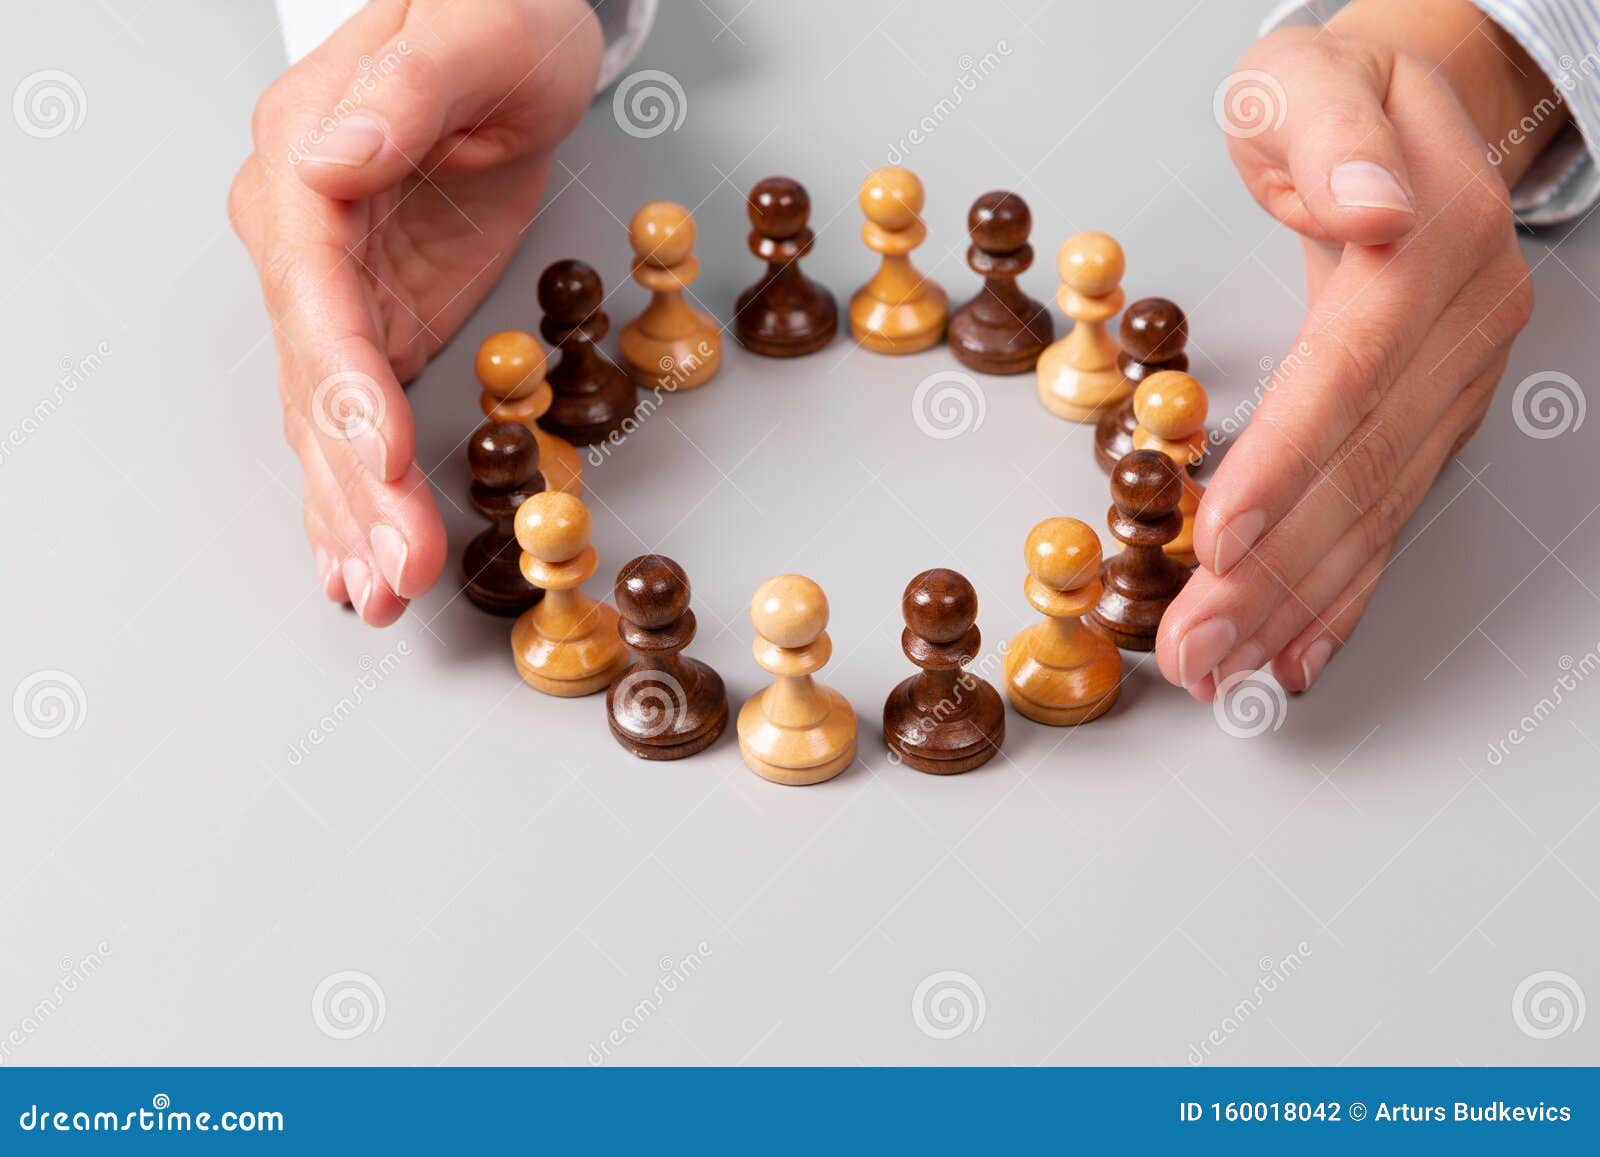 team concept, leadership concept. woman`s hands surrounding chess pawns standing in circle